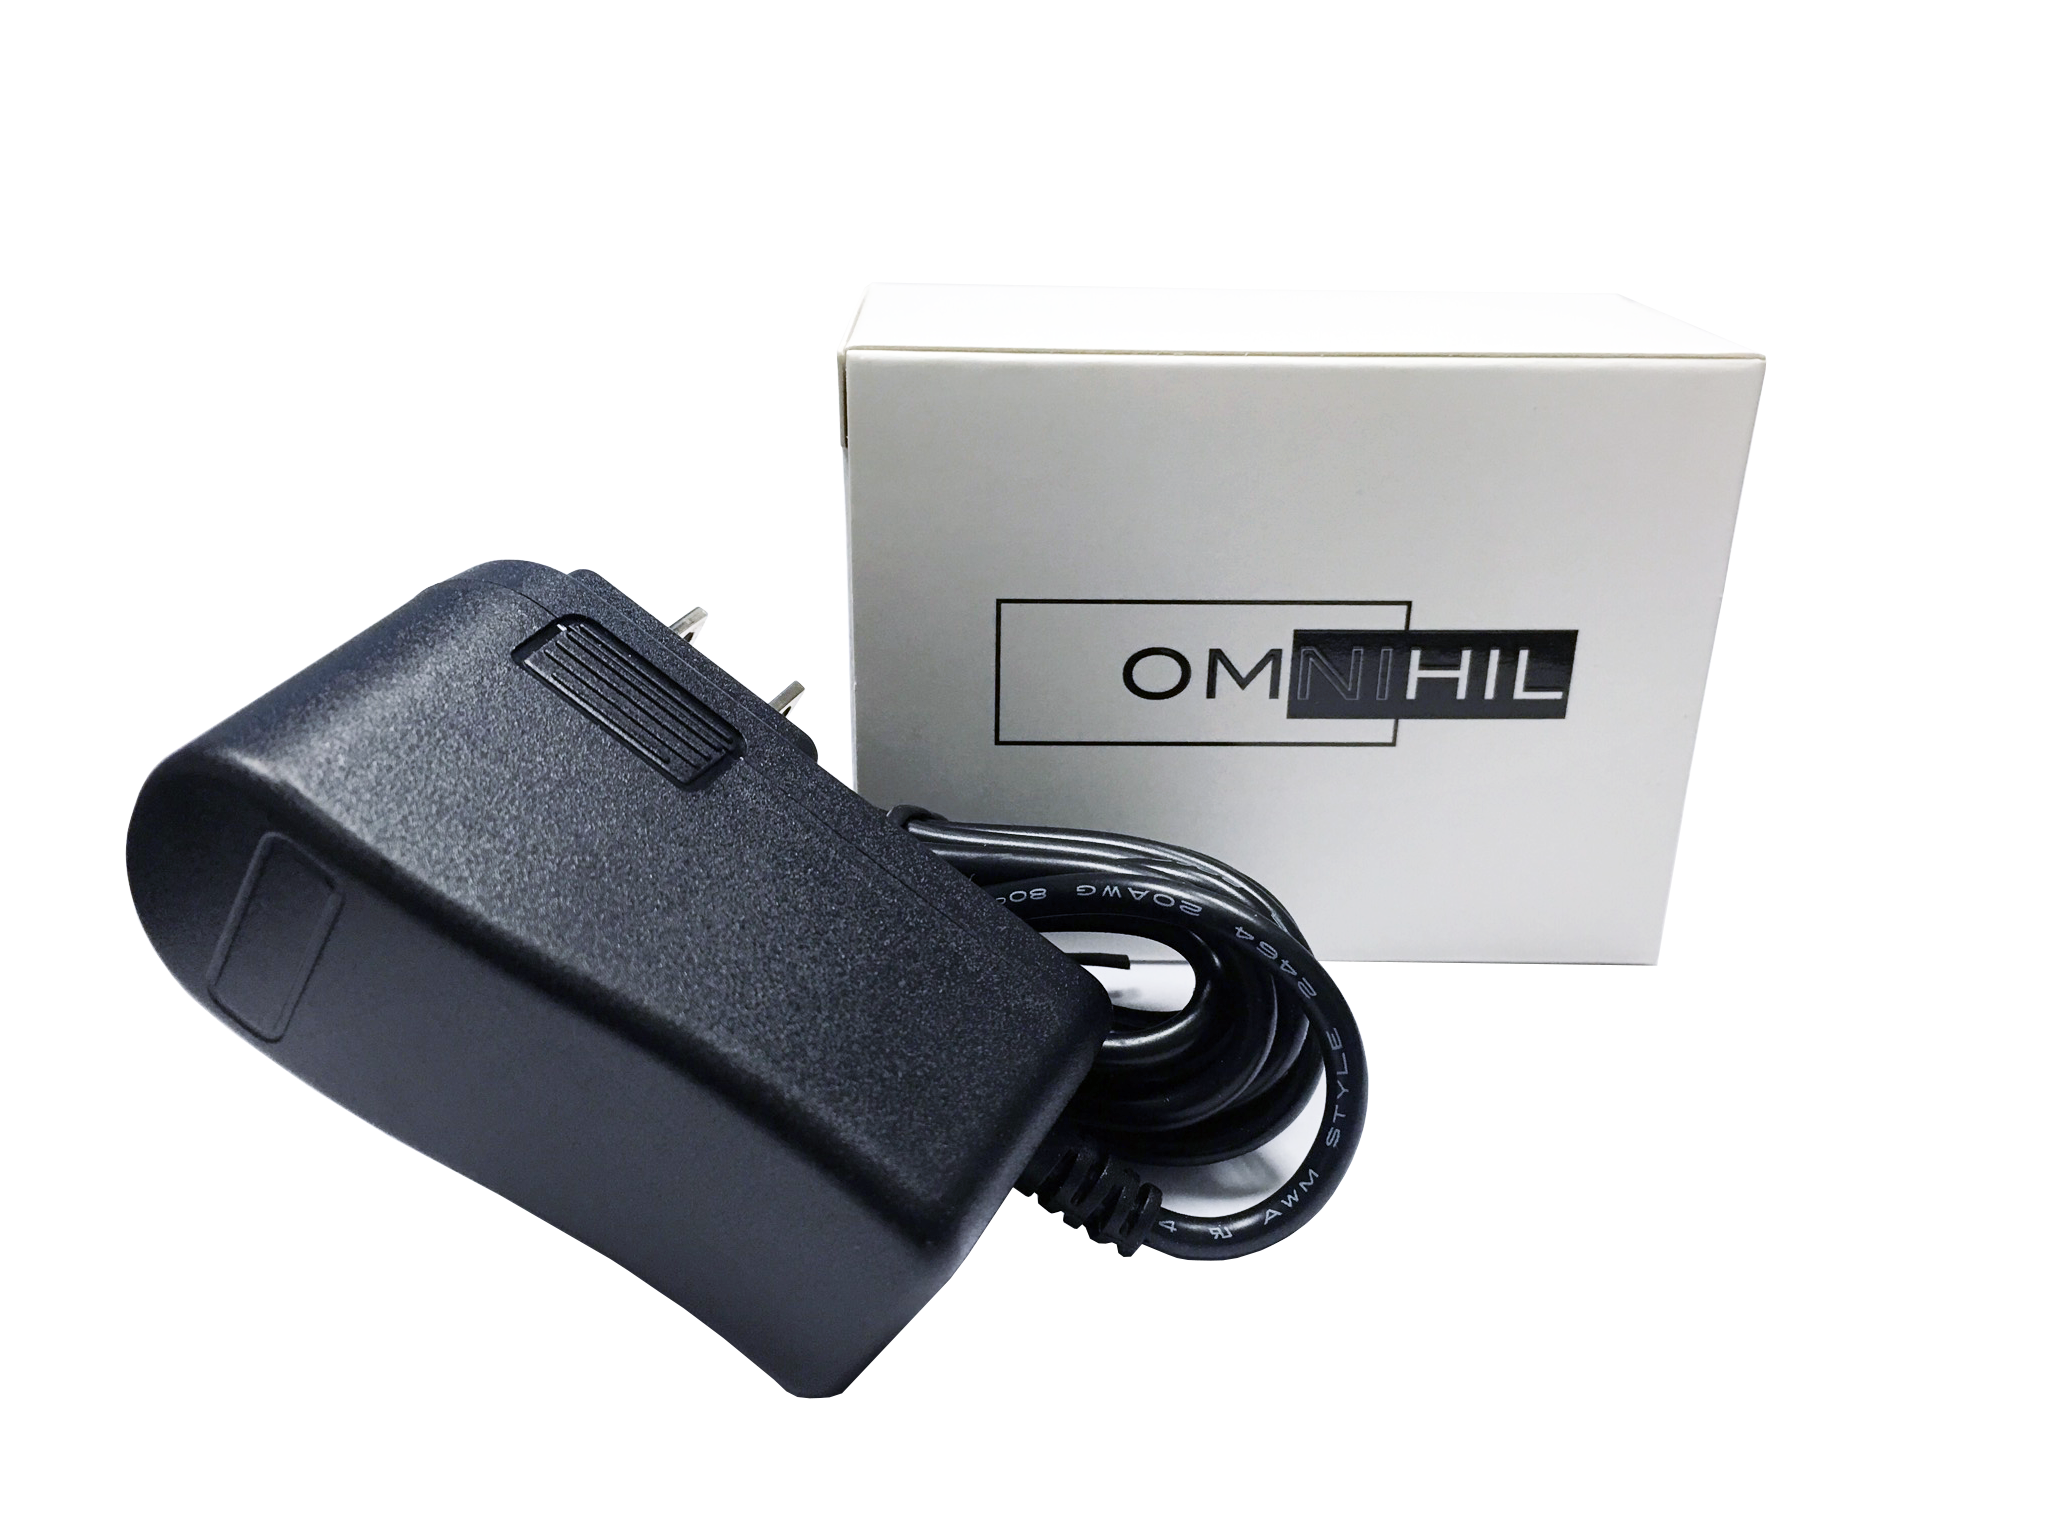 OMNIHIL AC/DC Power Adapter/Adaptor for Proform Elliptical Models: iSeries 800 & 785F Elliptical ; XP 420/520 Razor Elliptical ; XP StrideClimber 600 Elliptical ; Replacement Power Supply Cord - image 1 of 1